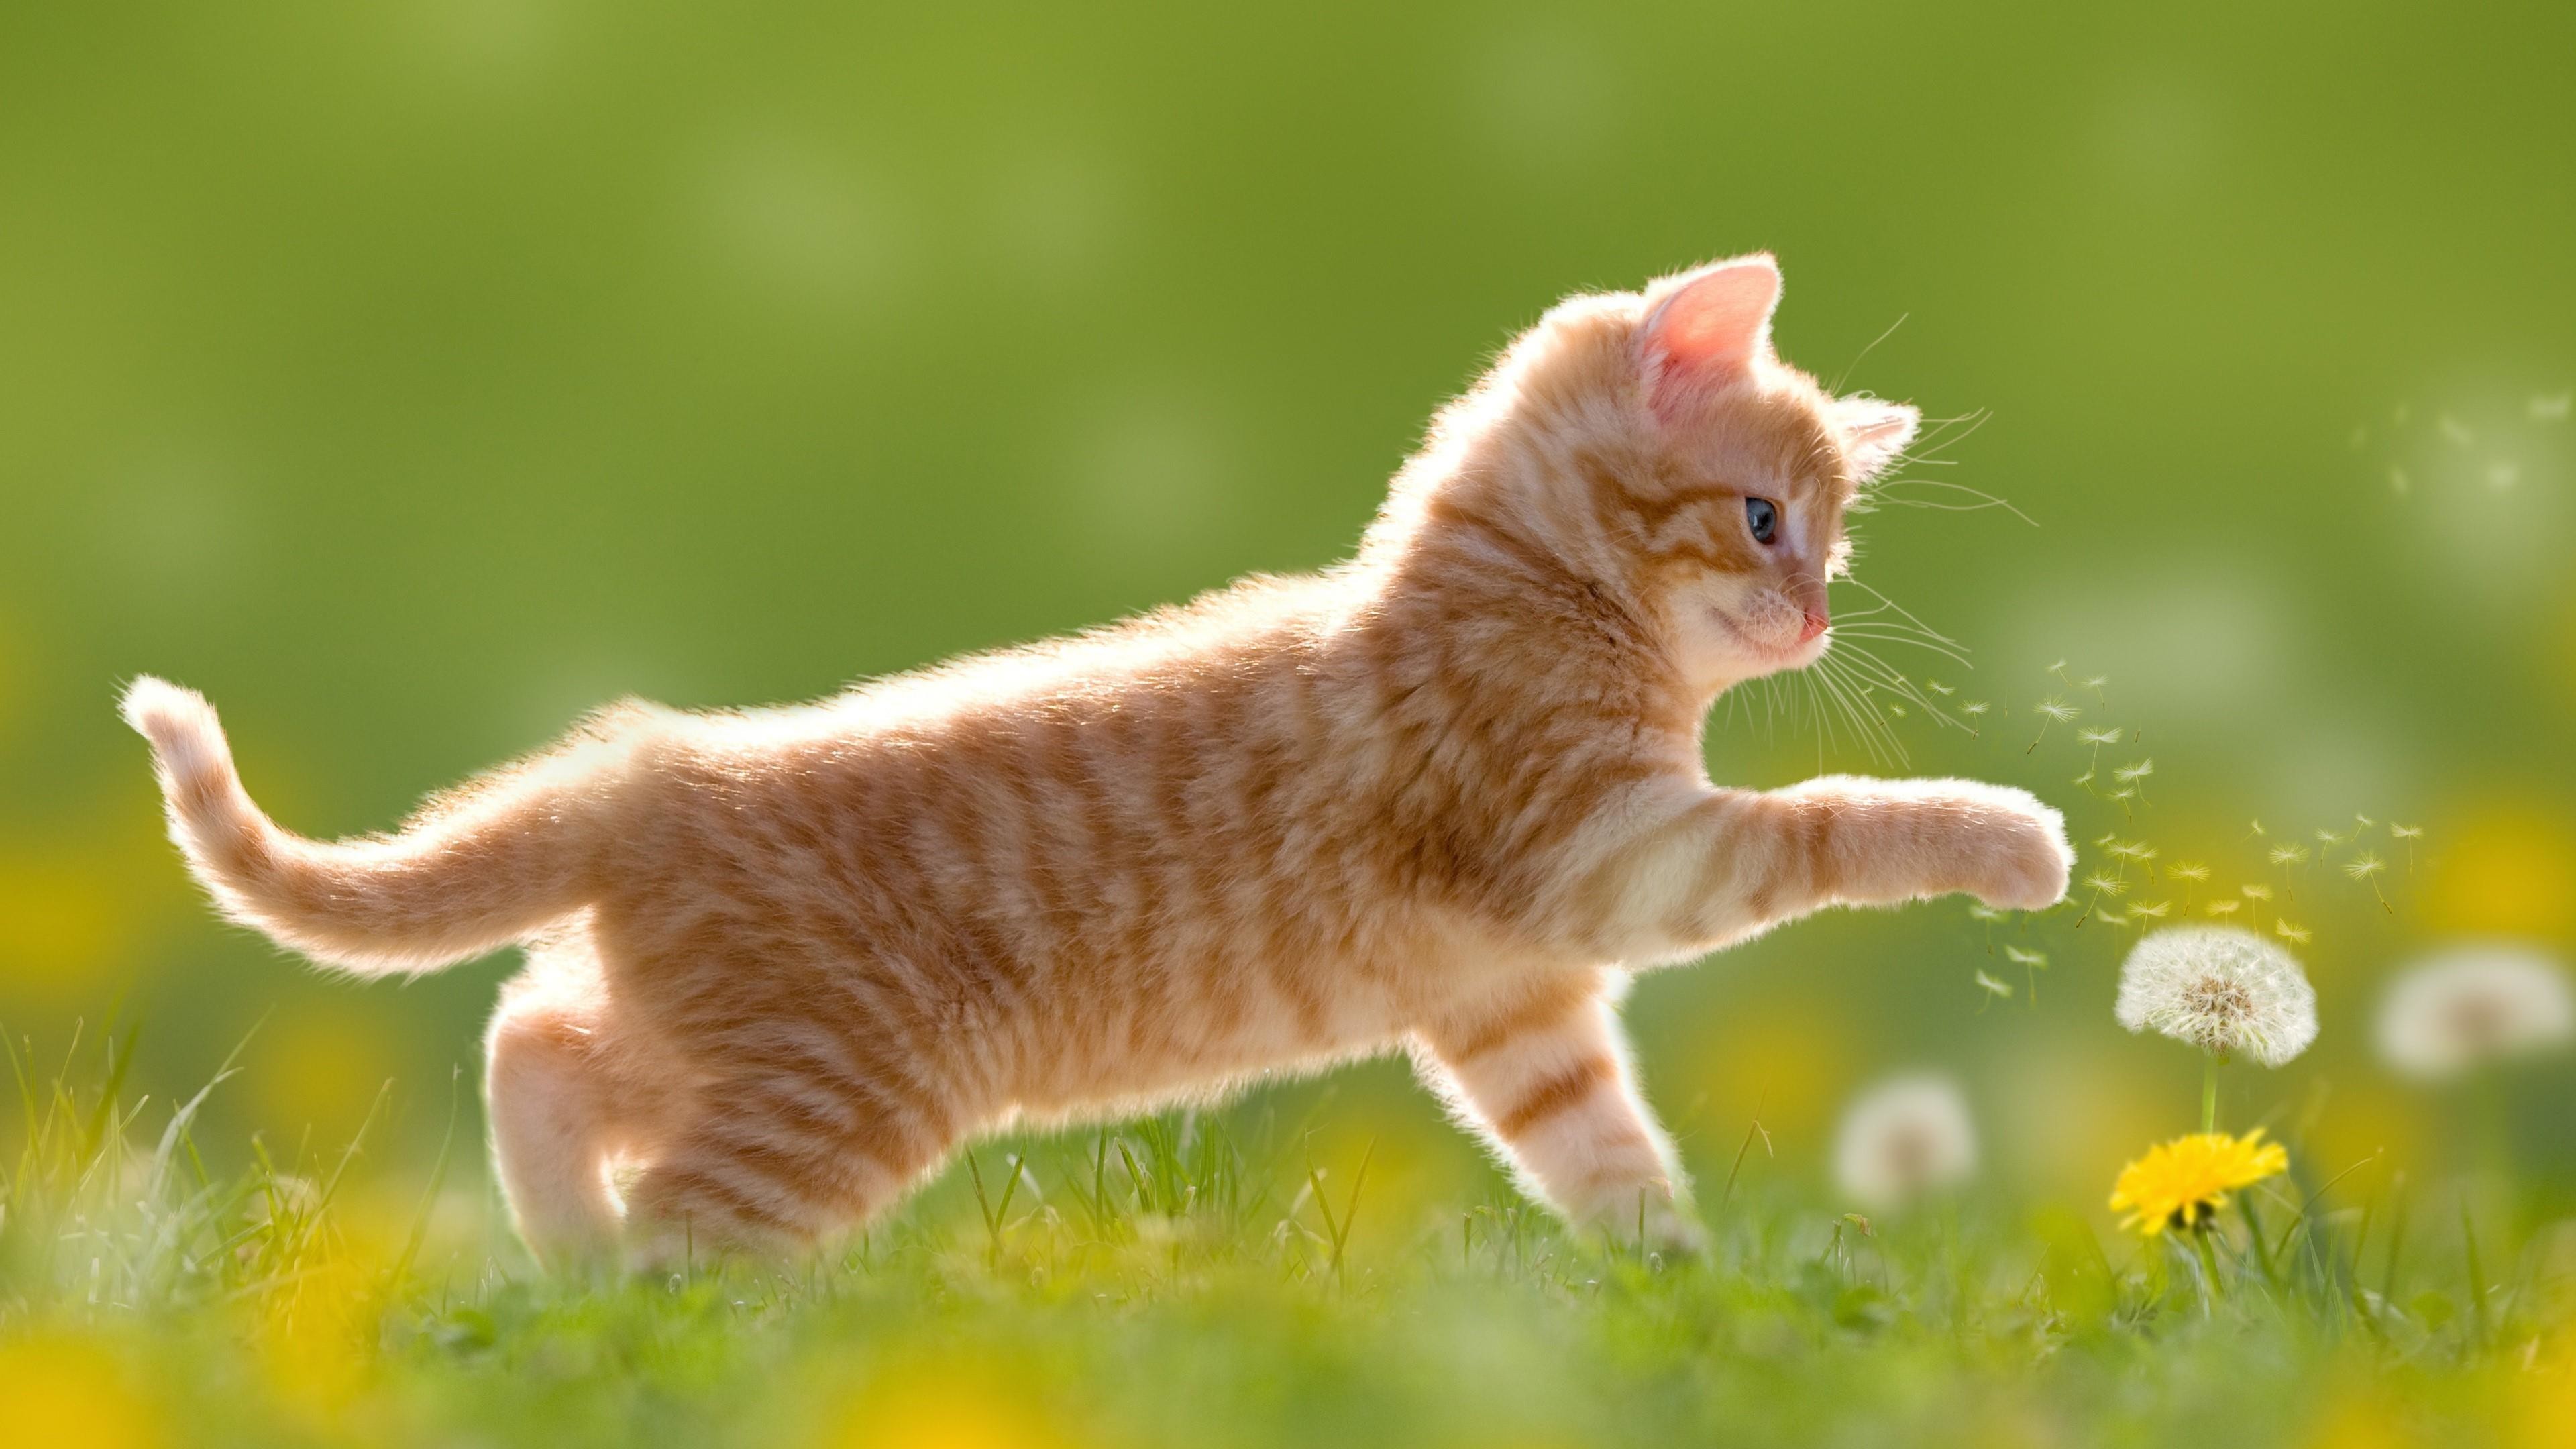 3840x2160  Cute Kitten Playing With A Dandelion Flower Wallpaper | Wallpaper  Studio 10 | Tens of thousands HD and UltraHD wallpapers for Android, ...